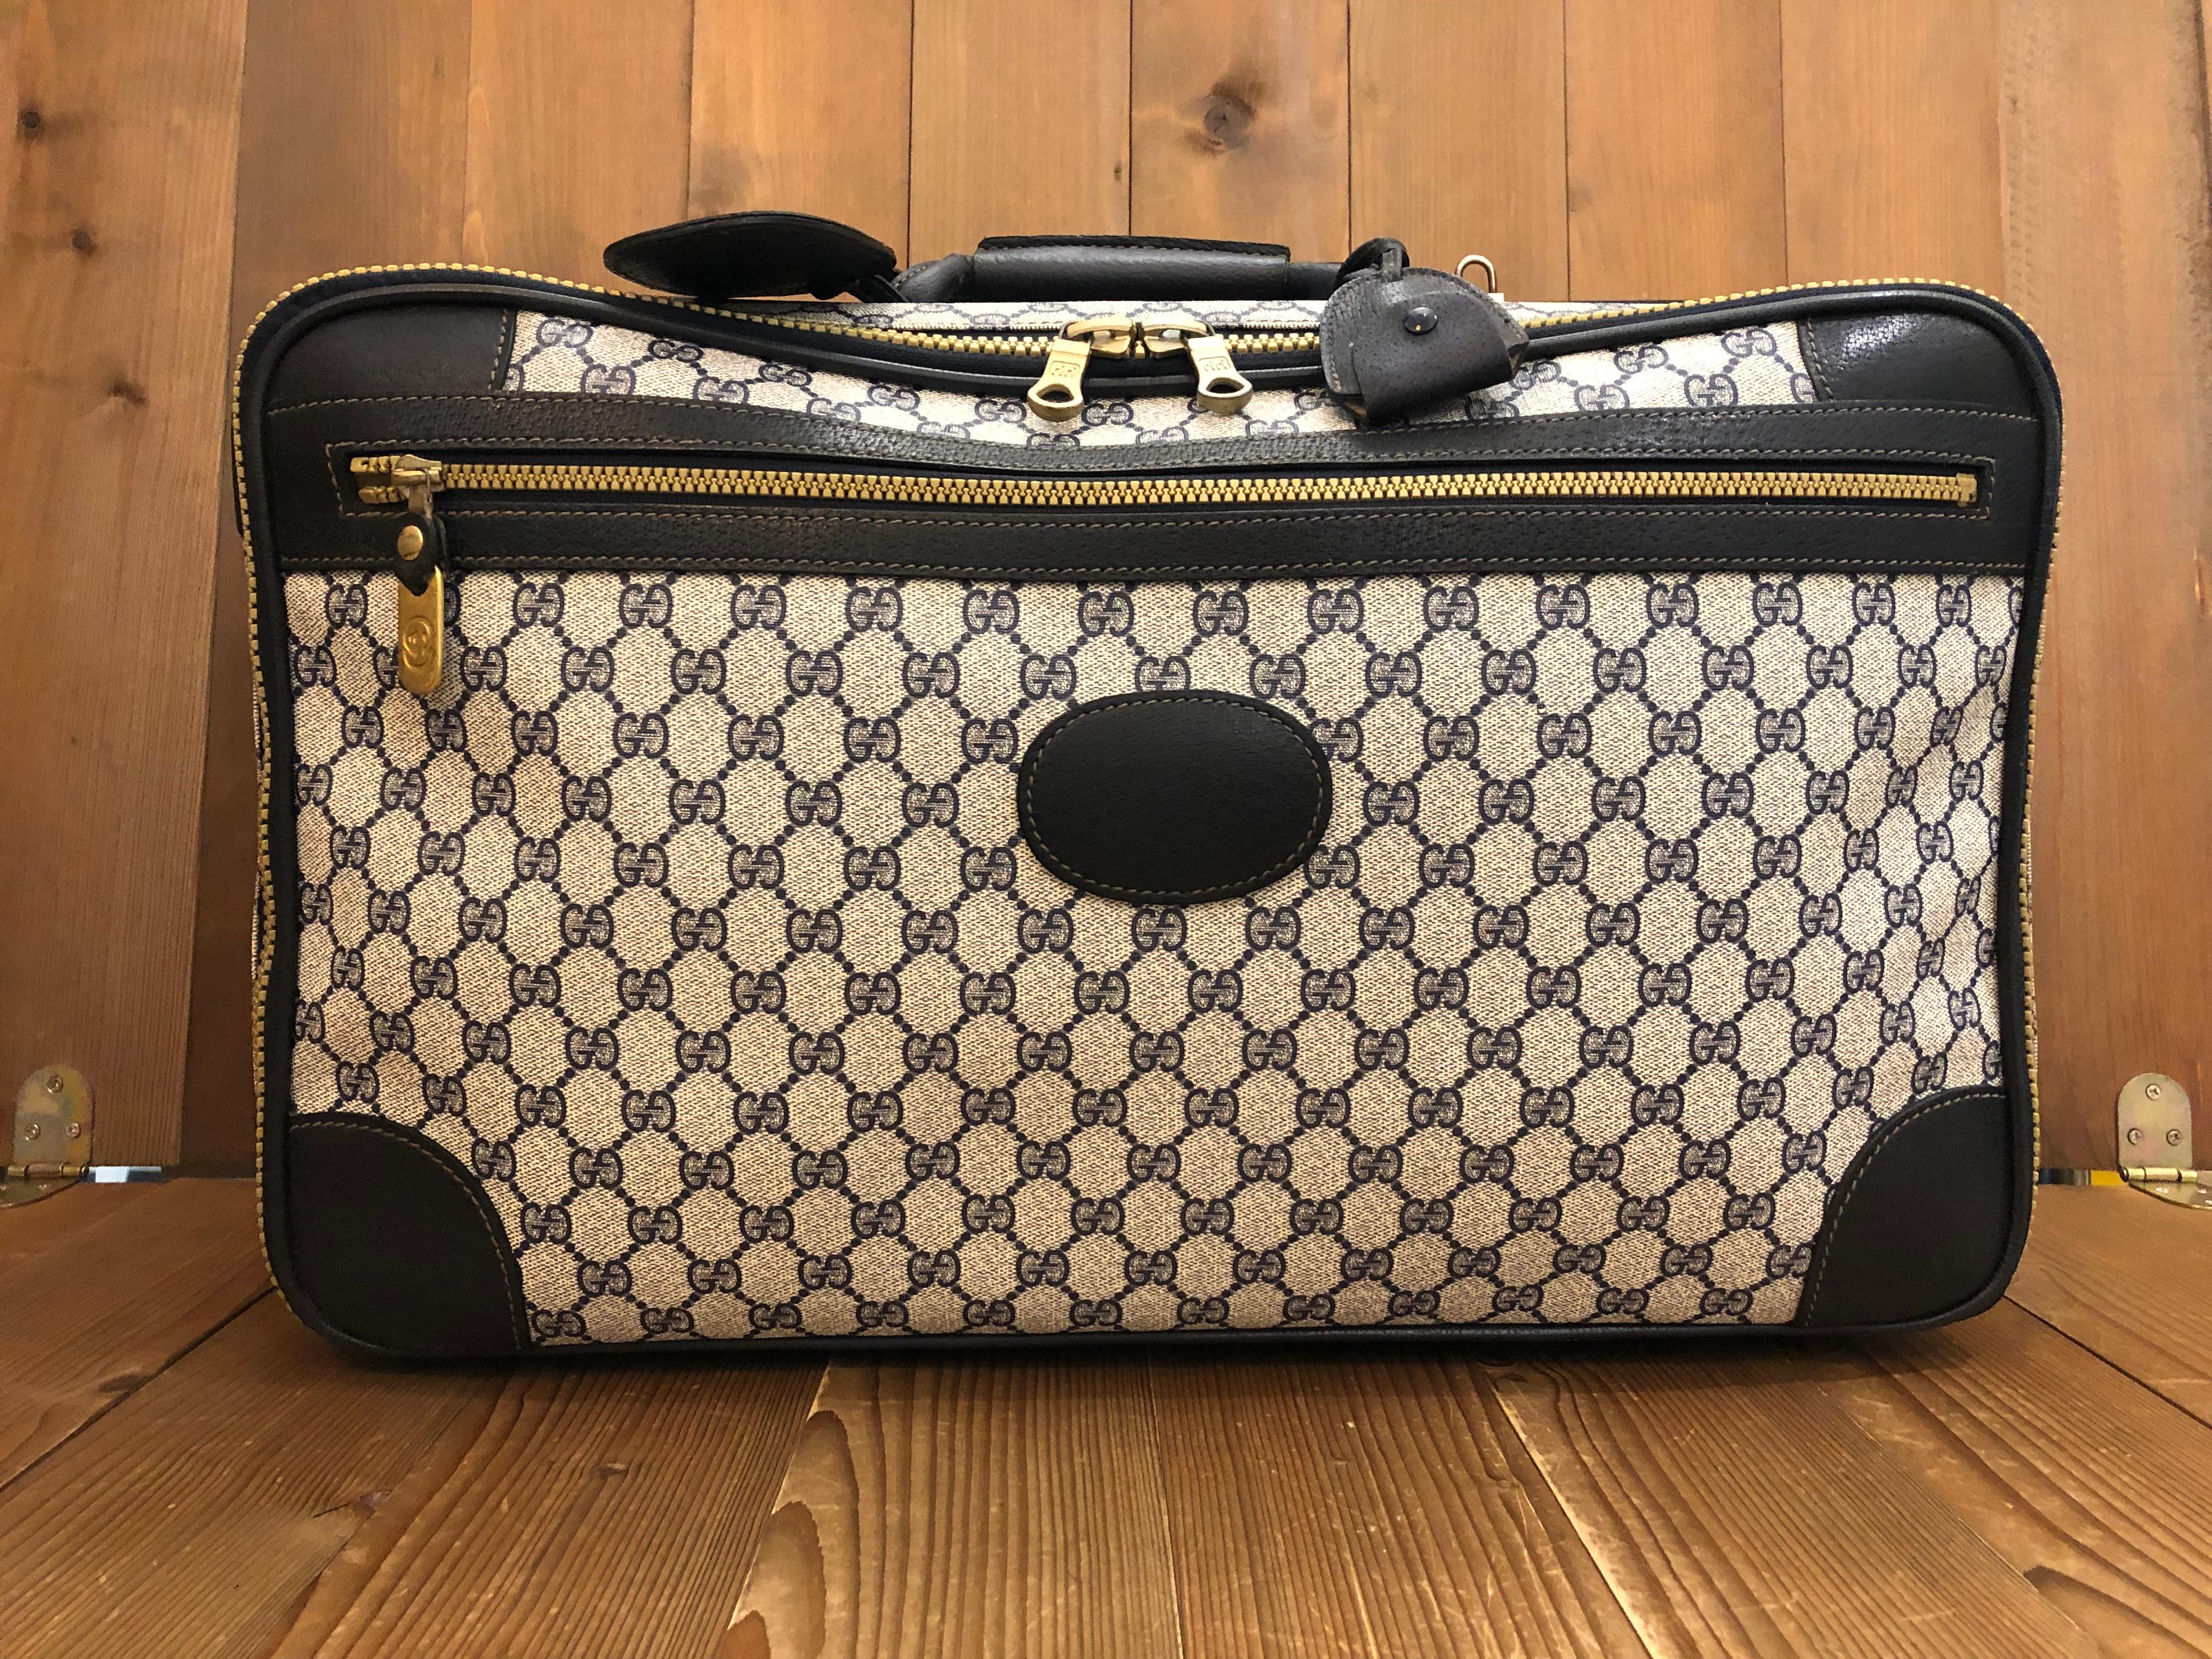 This vintage GUCCI Web softsided suitcase is crafted of Gucci's GG monogram coated canvas in navy trimmed with navy leather and decorated with Gucci's iconic Web stripe in blue/red. This softsided suitcase features two zip around compartments, one